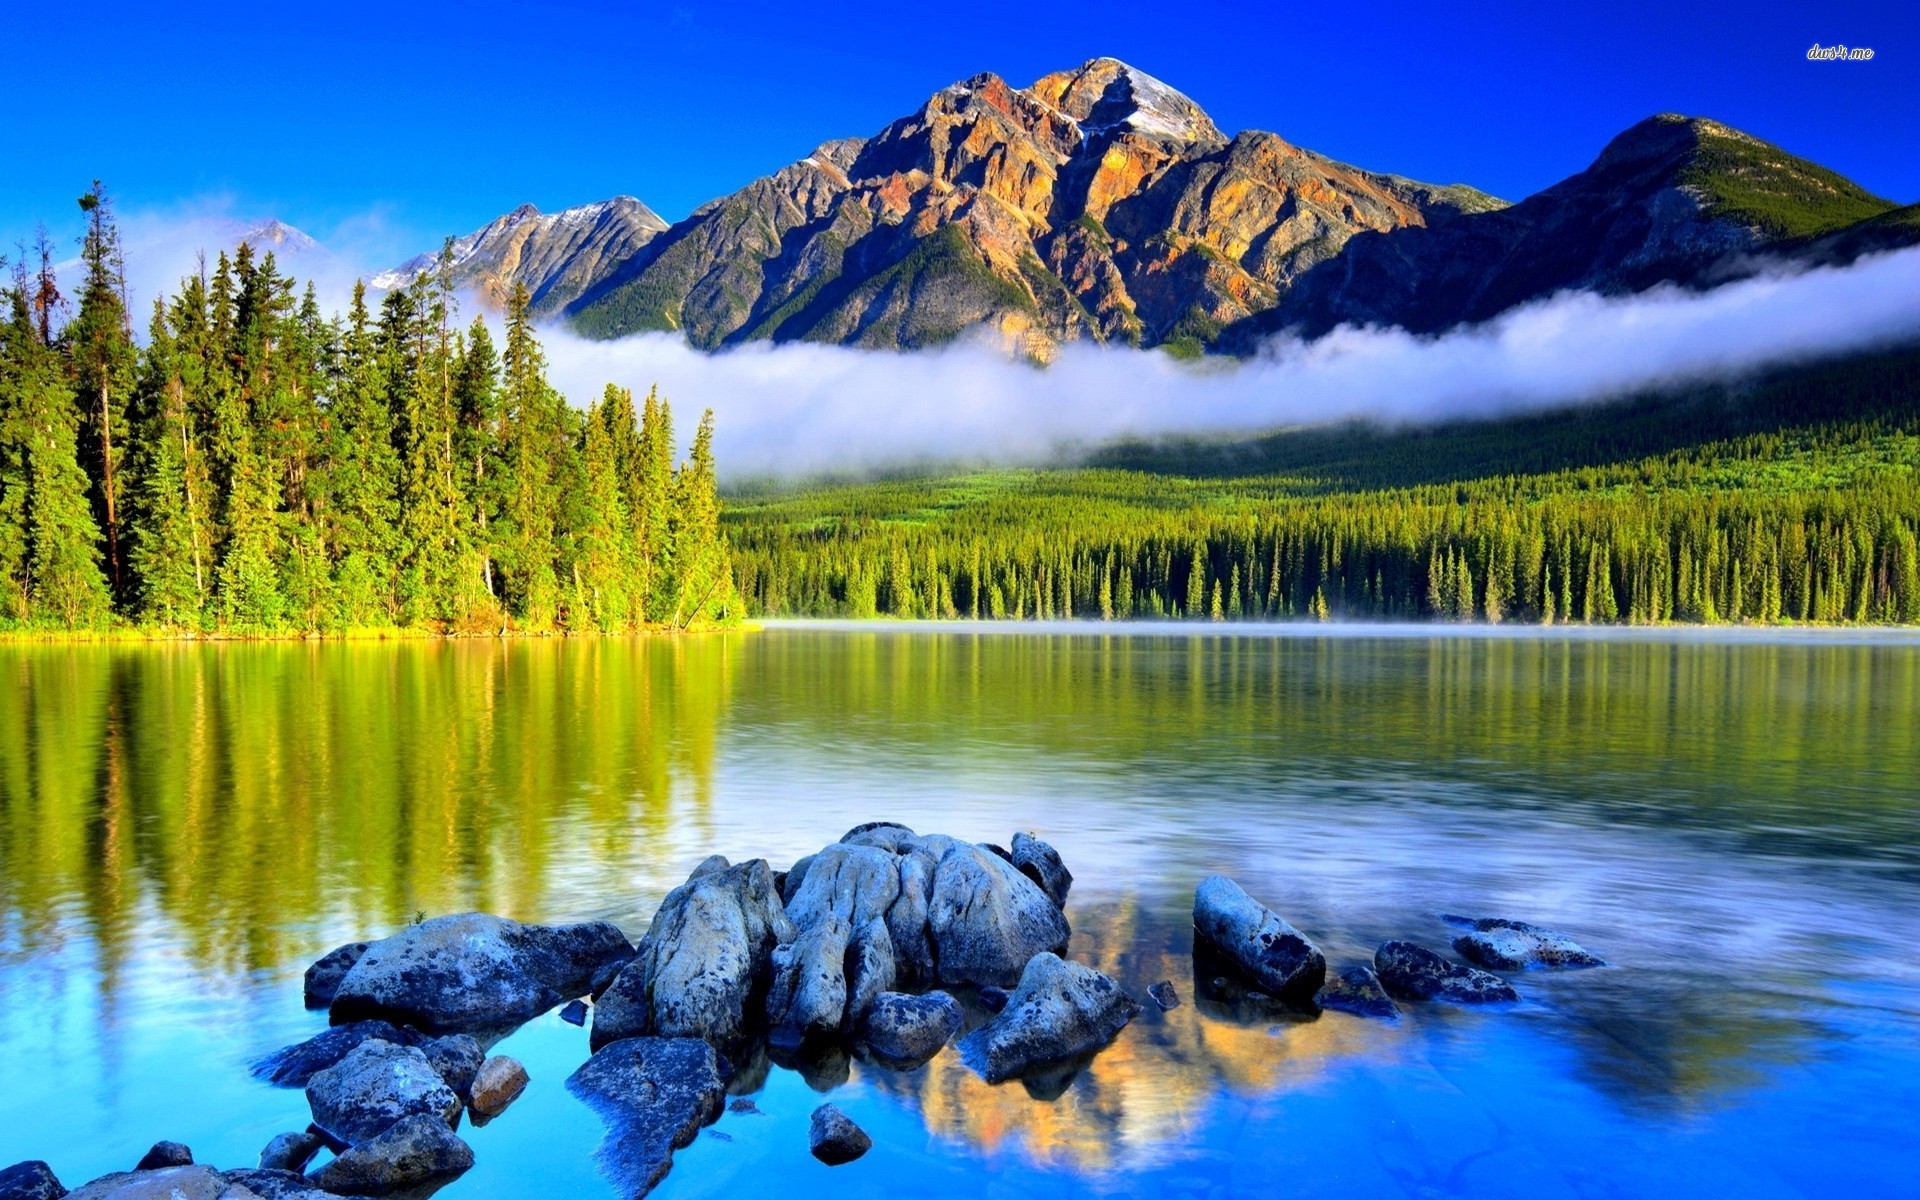 Picturesque mountain lake wallpaper - Nature wallpapers - #20969